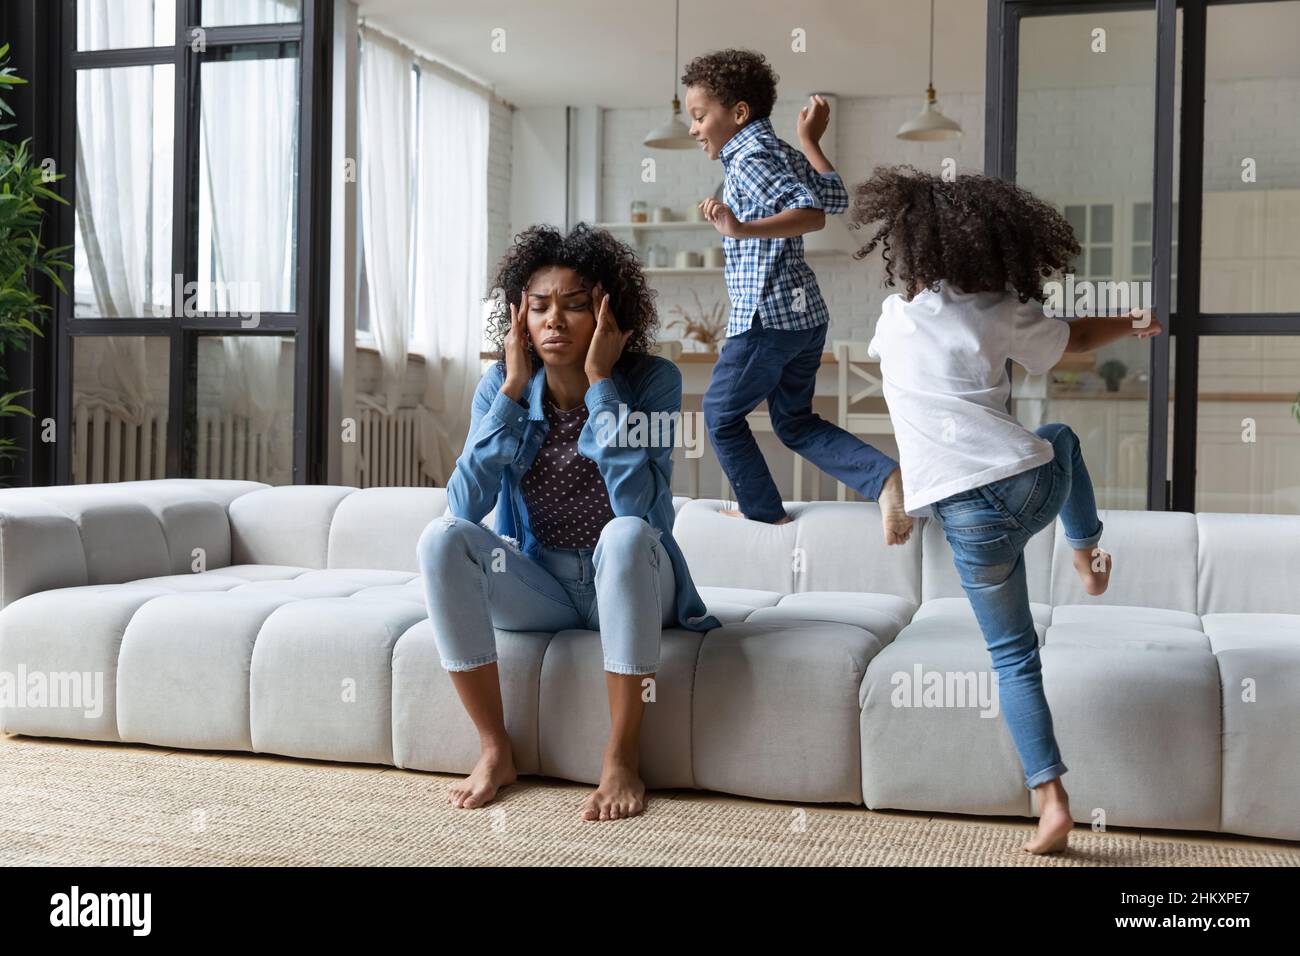 Unhappy young African American mother irritated by loud kids. Stock Photo